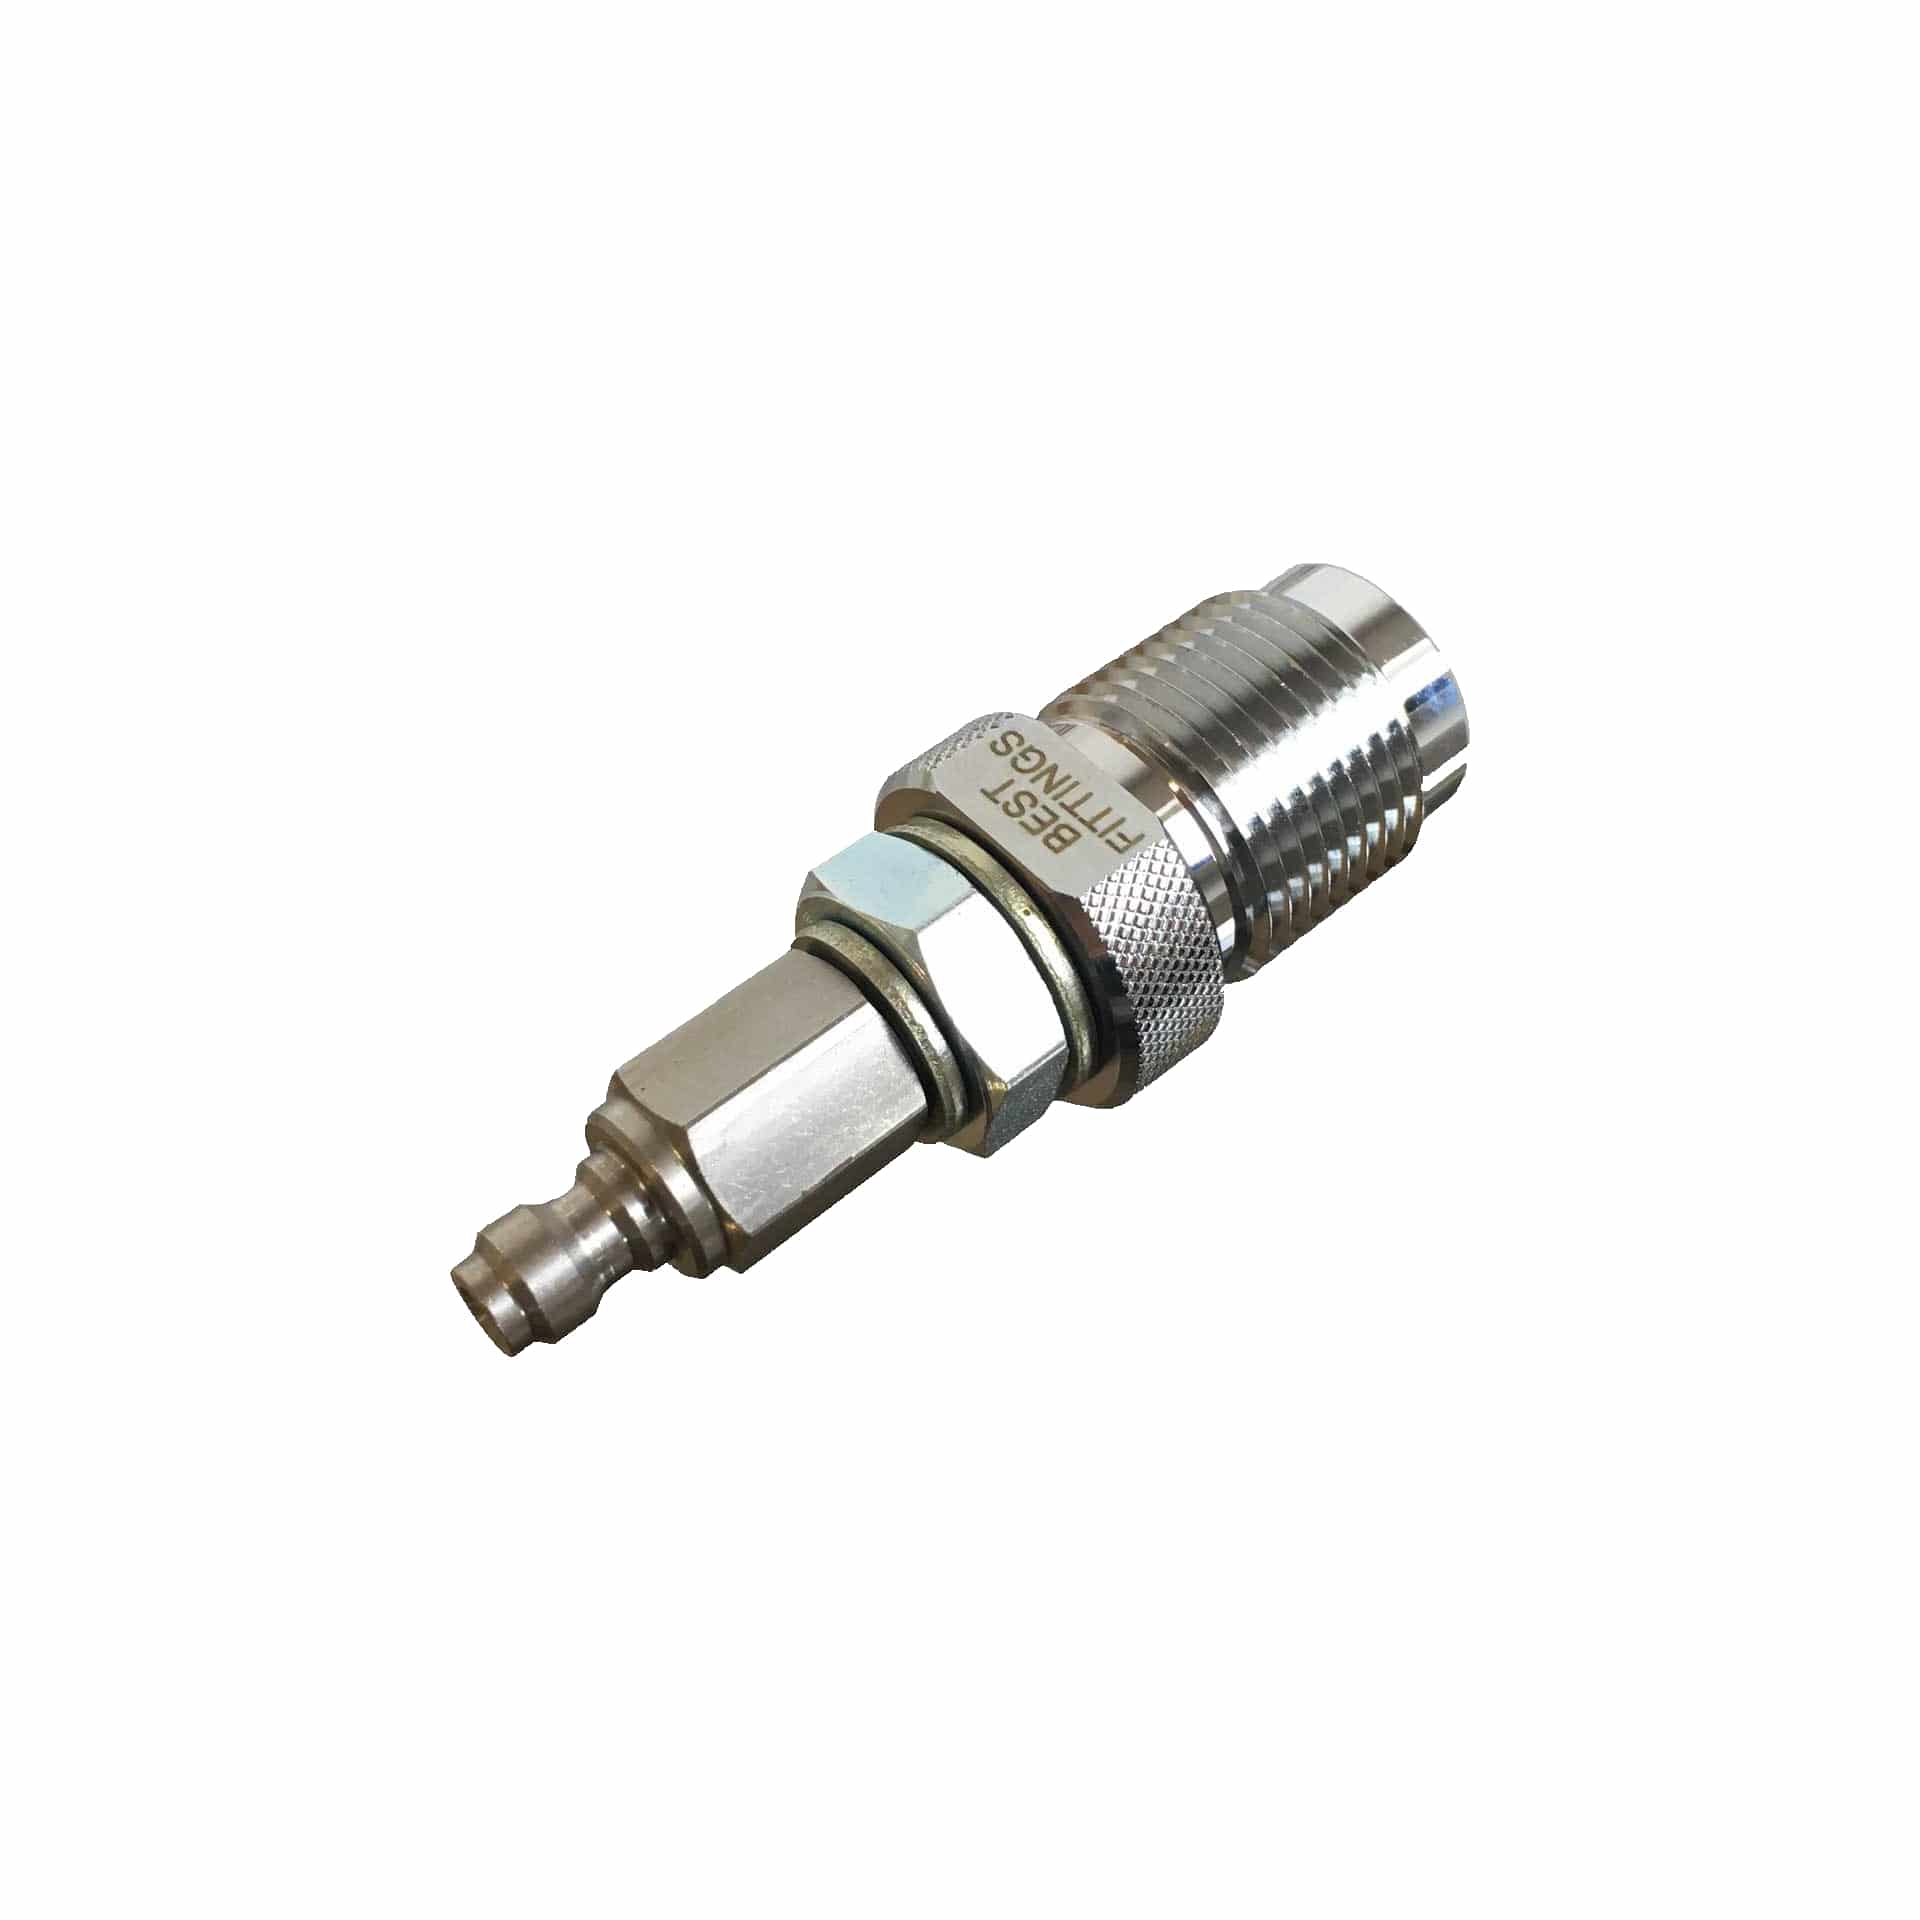 03b3-mm01 Quickfill connection for cylinder type DIN 200/300